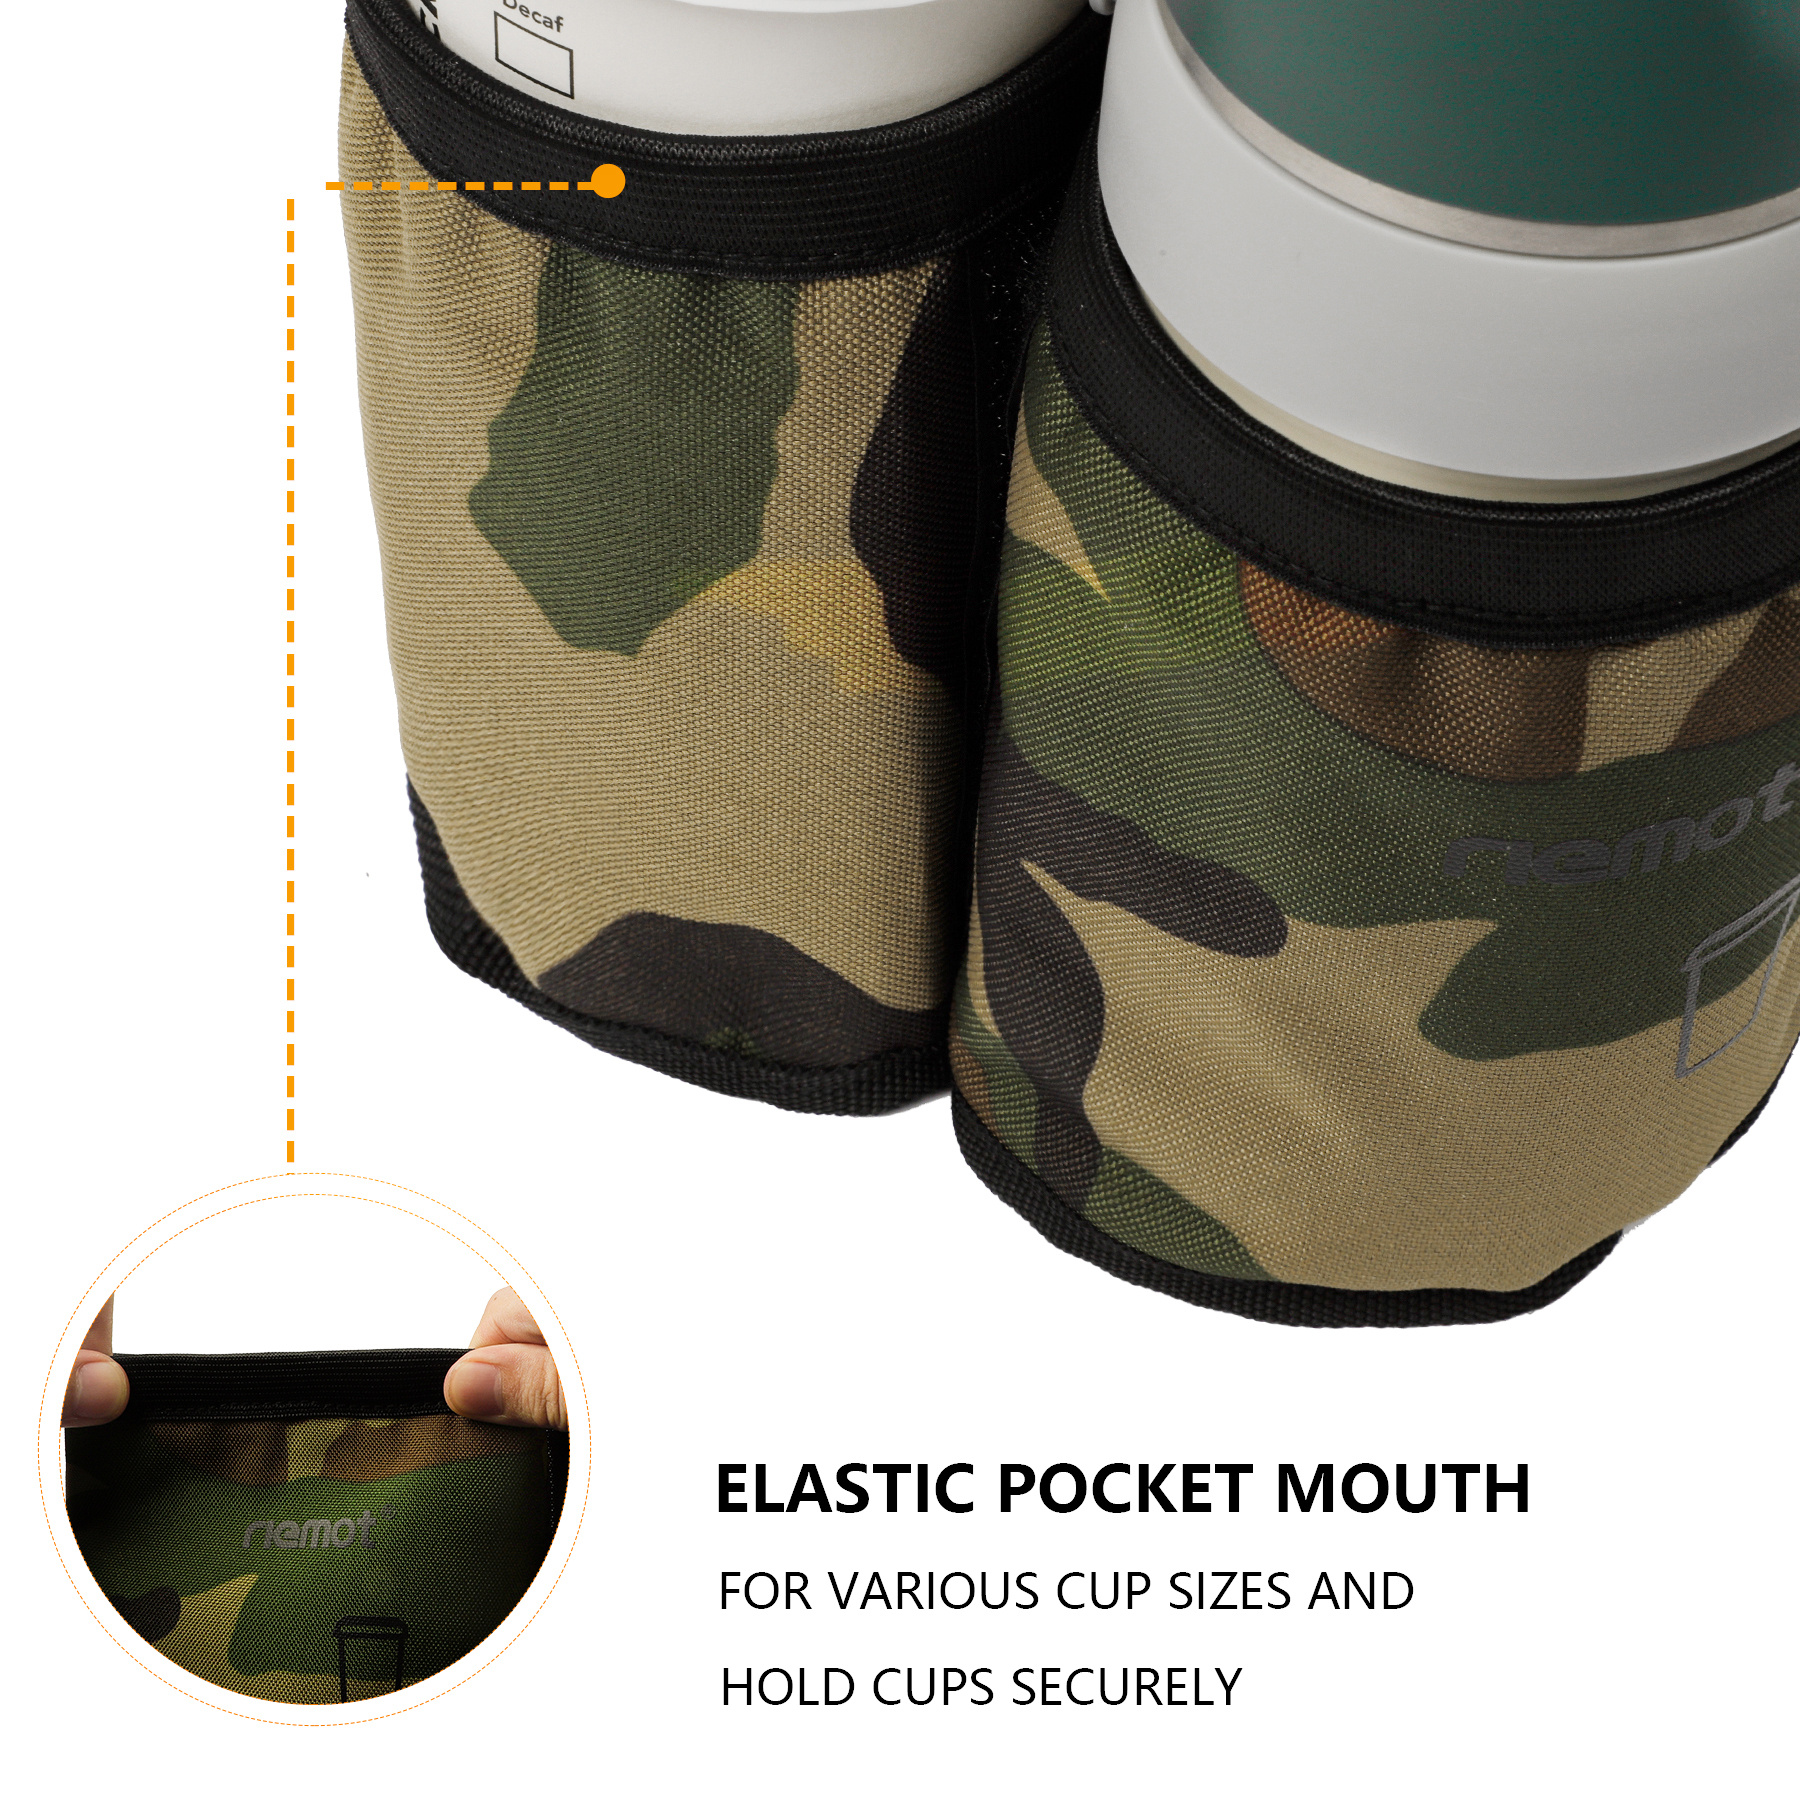 riemot Luggage Travel Cup Holder: $16 Hands-Free Tool for